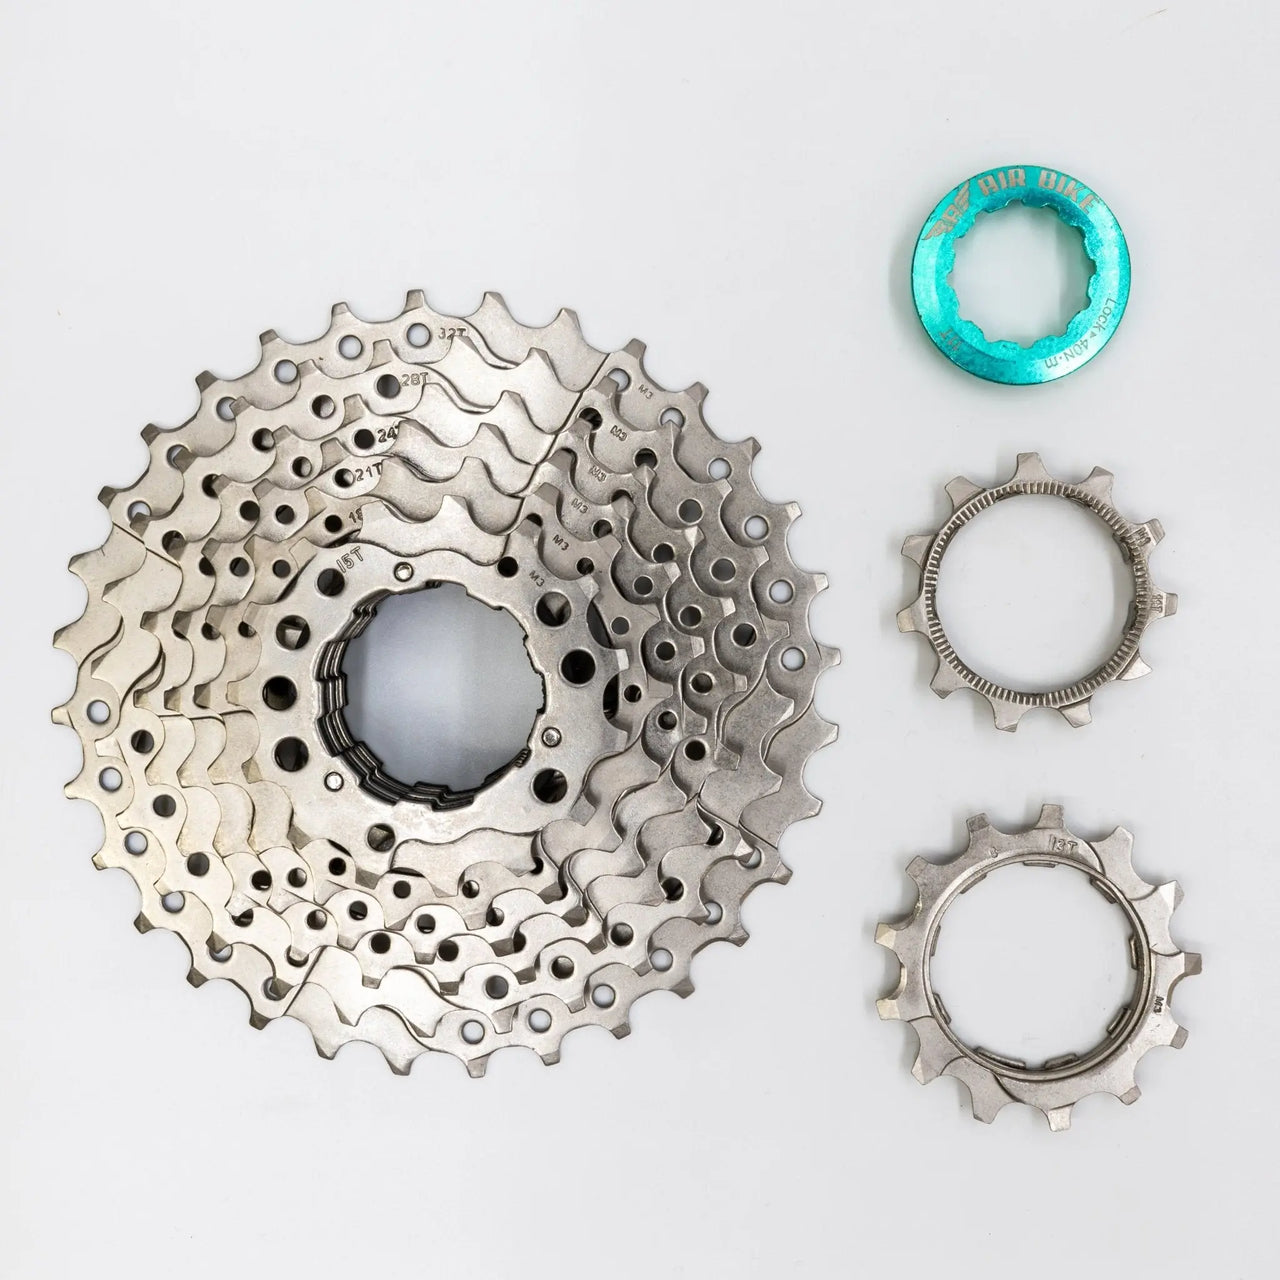 8 Speed 11-32T Cassette For Mountain Bike MTB & Road fits Shimano/Sram - Air BikeBicycle Cassettes & Freewheels